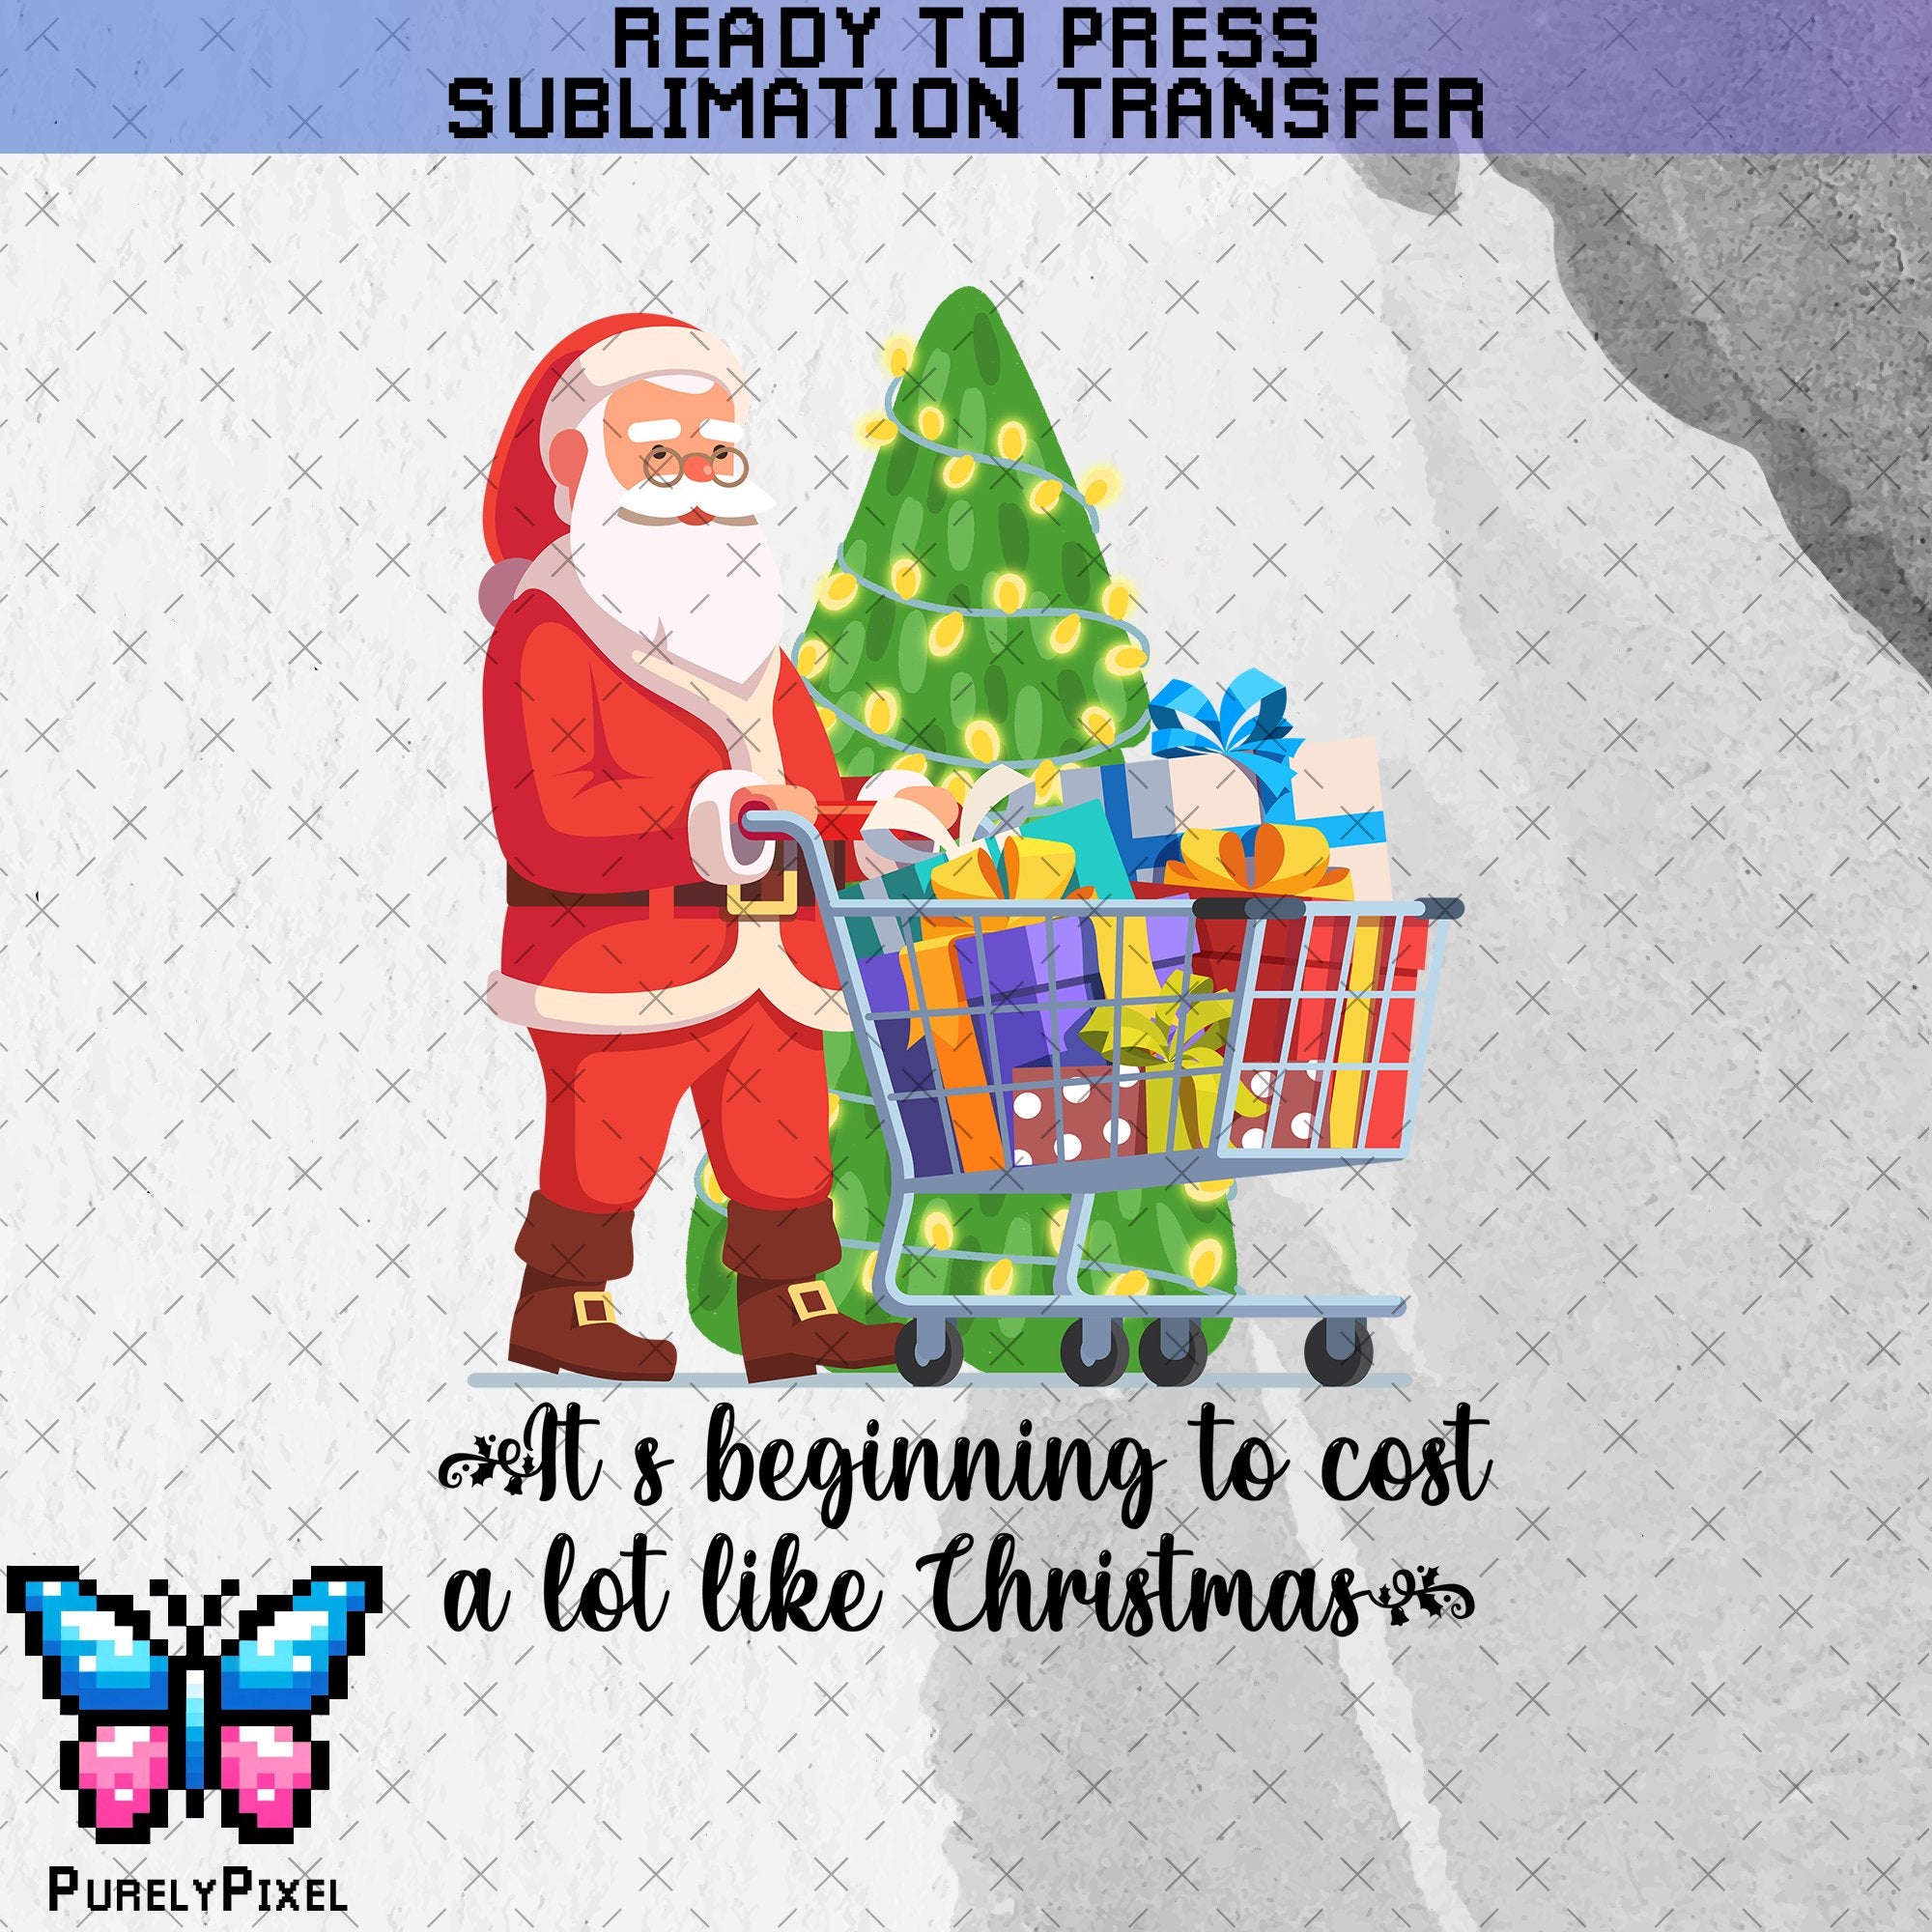 Beginning to Cost a lot like Christmas Sub Transfer | Funny Winter Christmas with Santa Sub | Ready to Press Sublimation Transfer | PurelyPixels | Sublimation Transfers